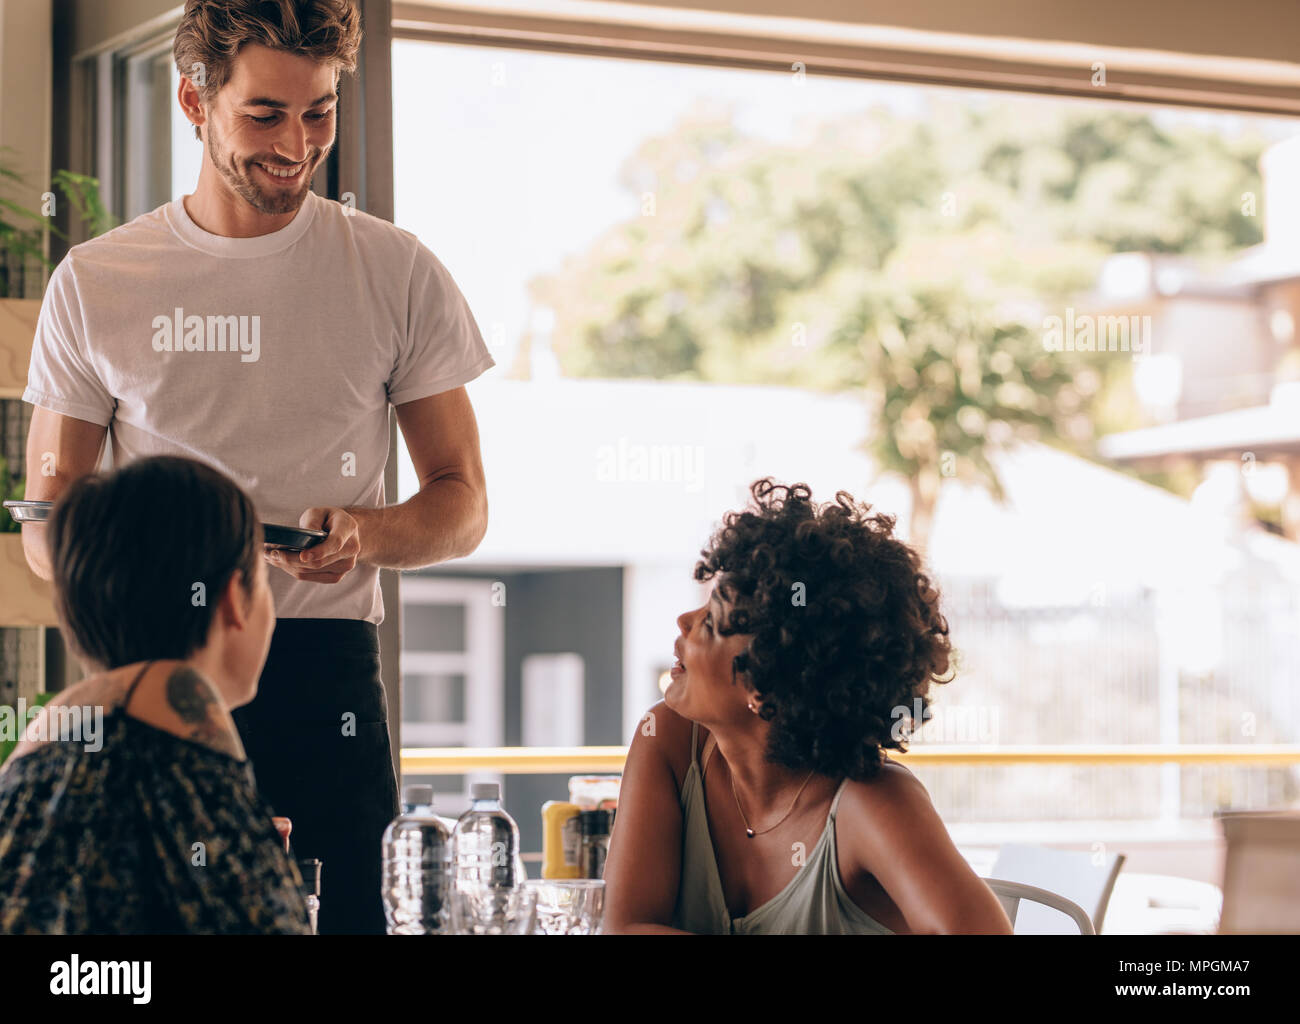 Young woman with a friend ordering to waiter at cafe. Two women sitting at cafe giving order to male waiter. Stock Photo